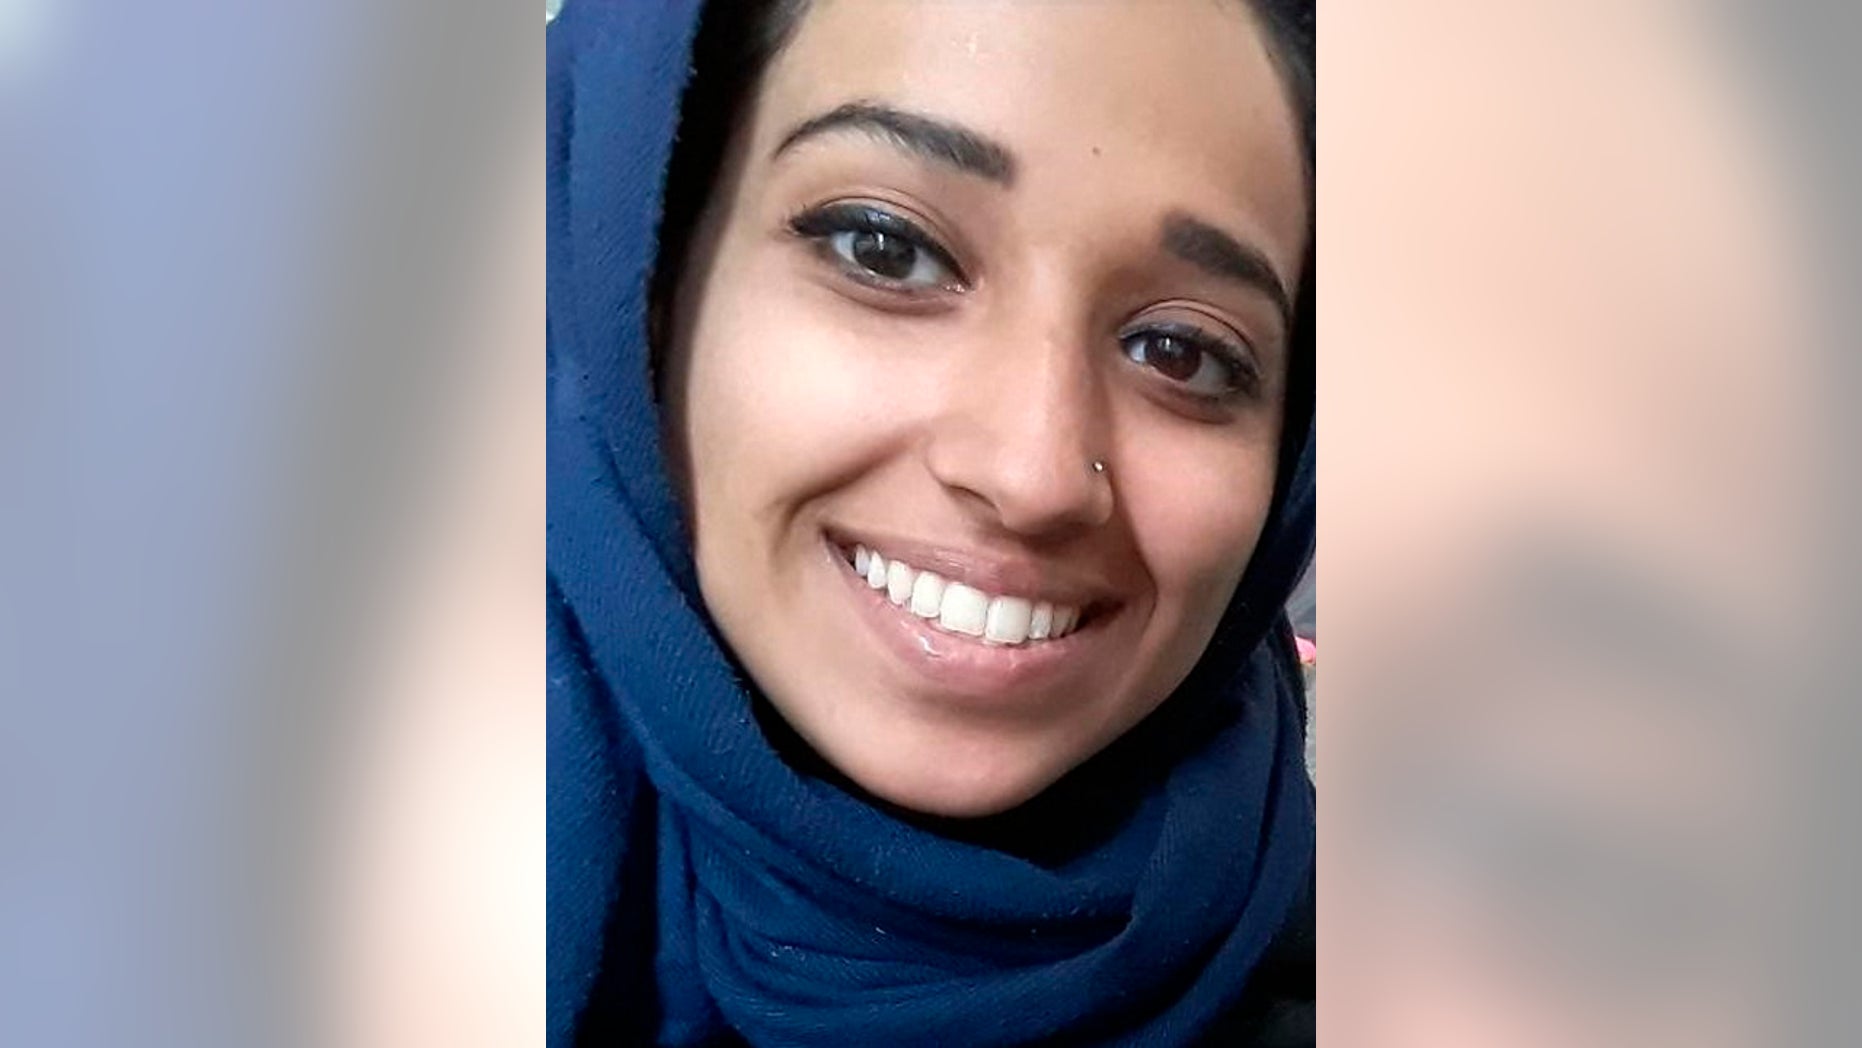 Hoda Muthana is an Alabama woman who left home to join the Islamic State group after becoming radicalized online. She now wants to return to the U.S., a lawyer for her family said this week.